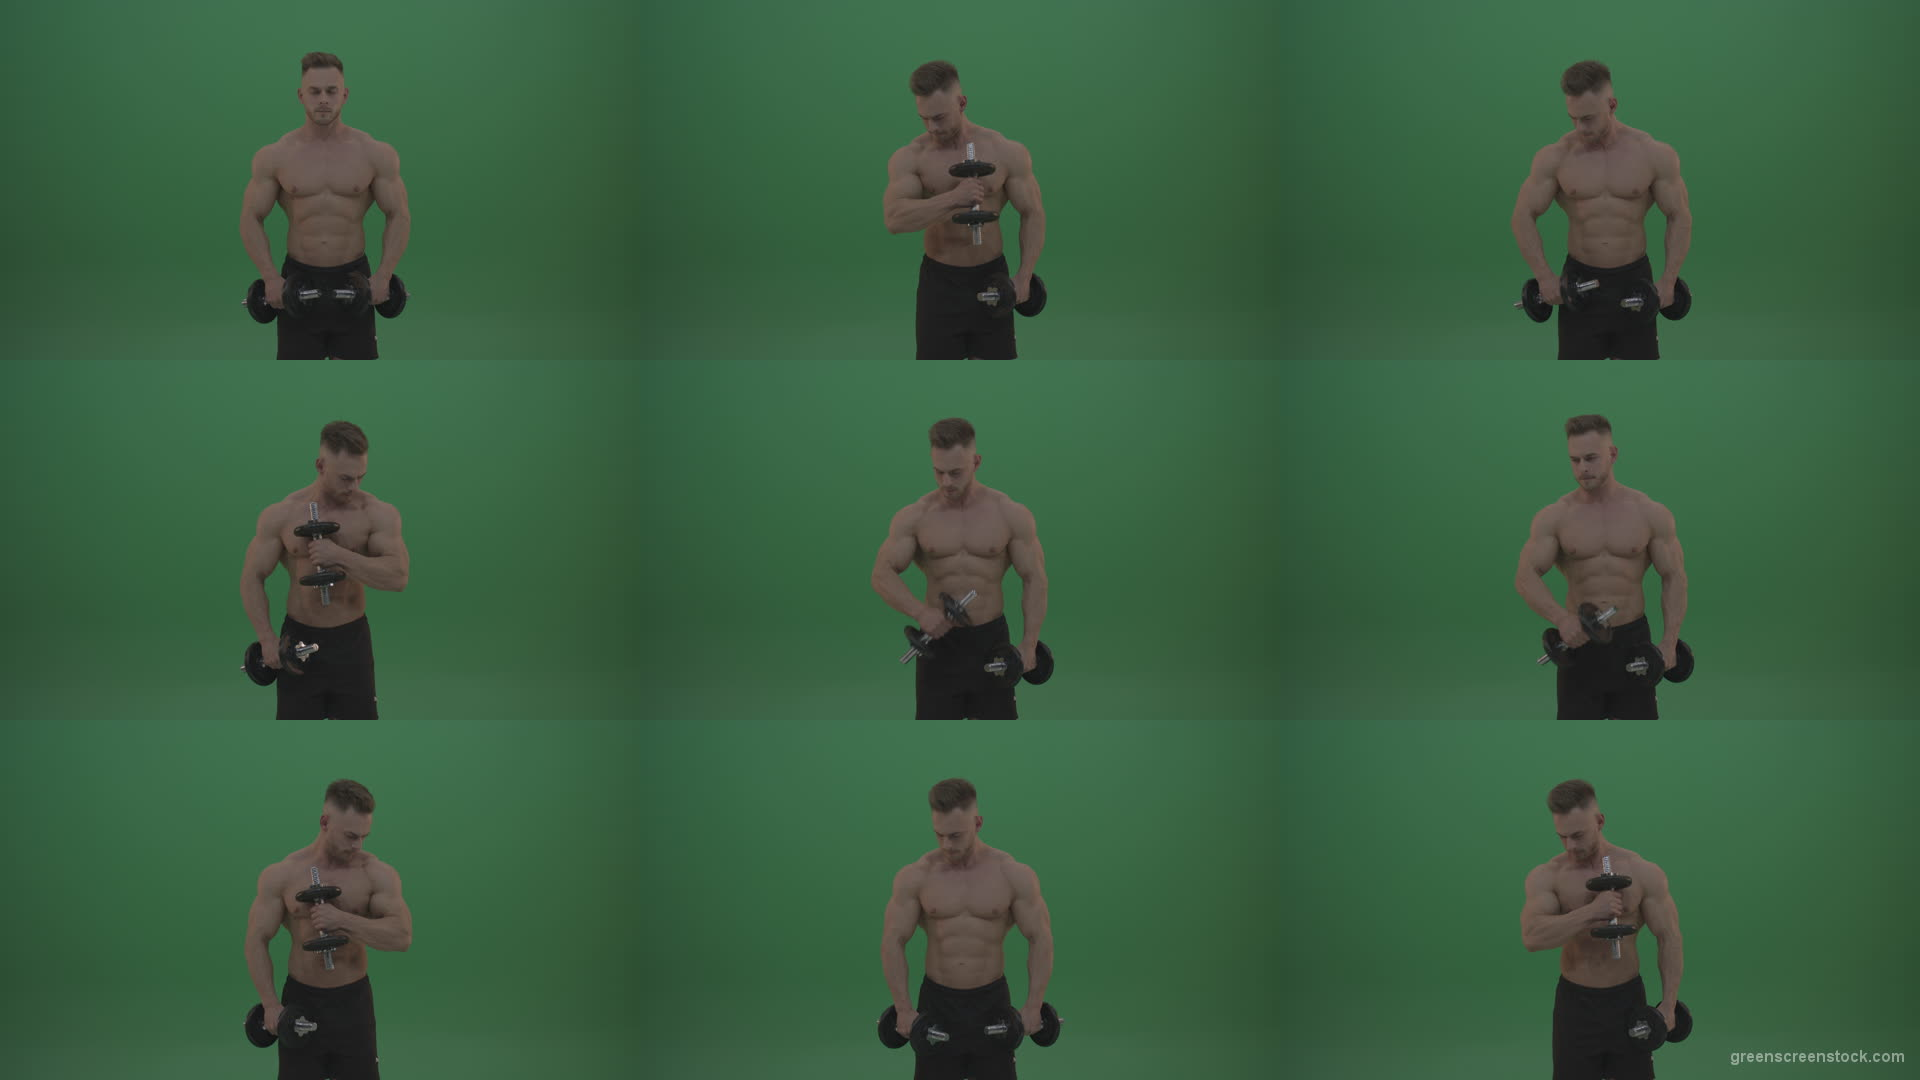 Young_Bodybuilder_Working_Out_With_Two_Handed_Dumbbell_Biceps_Exercises_On_Green_Screen_Wall_Background Green Screen Stock